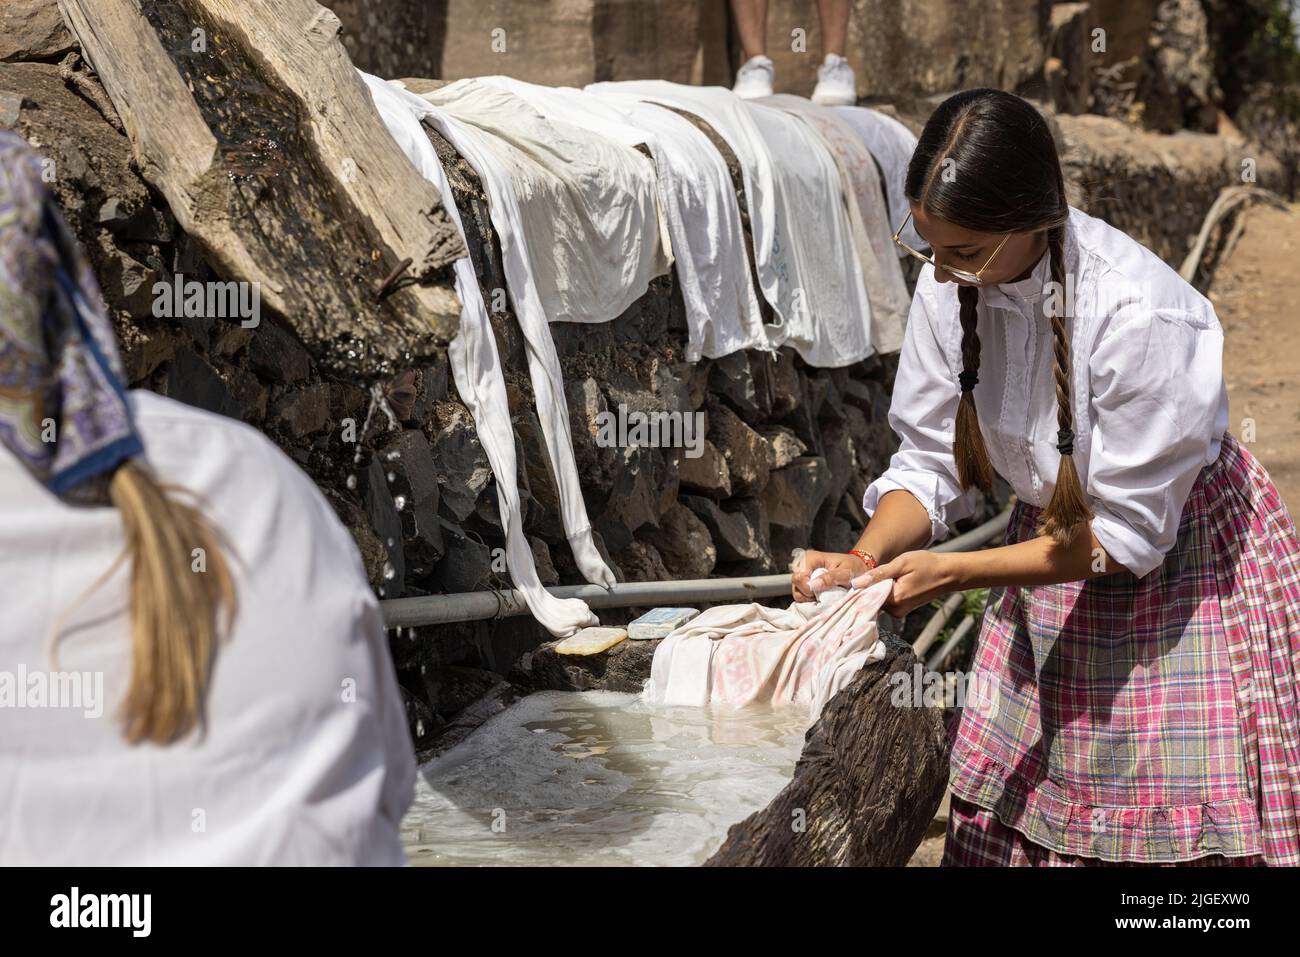 Chirche, Tenerife, 10 July 2022. Young girls washing clothes in a wooden trough at the communal wash place. Villagers celebrate the Día de tradiciones, Day of Traditions in the small mountain village where they renact scenes from the rural lifestyle lived by their ancestors in the 1940s Stock Photo